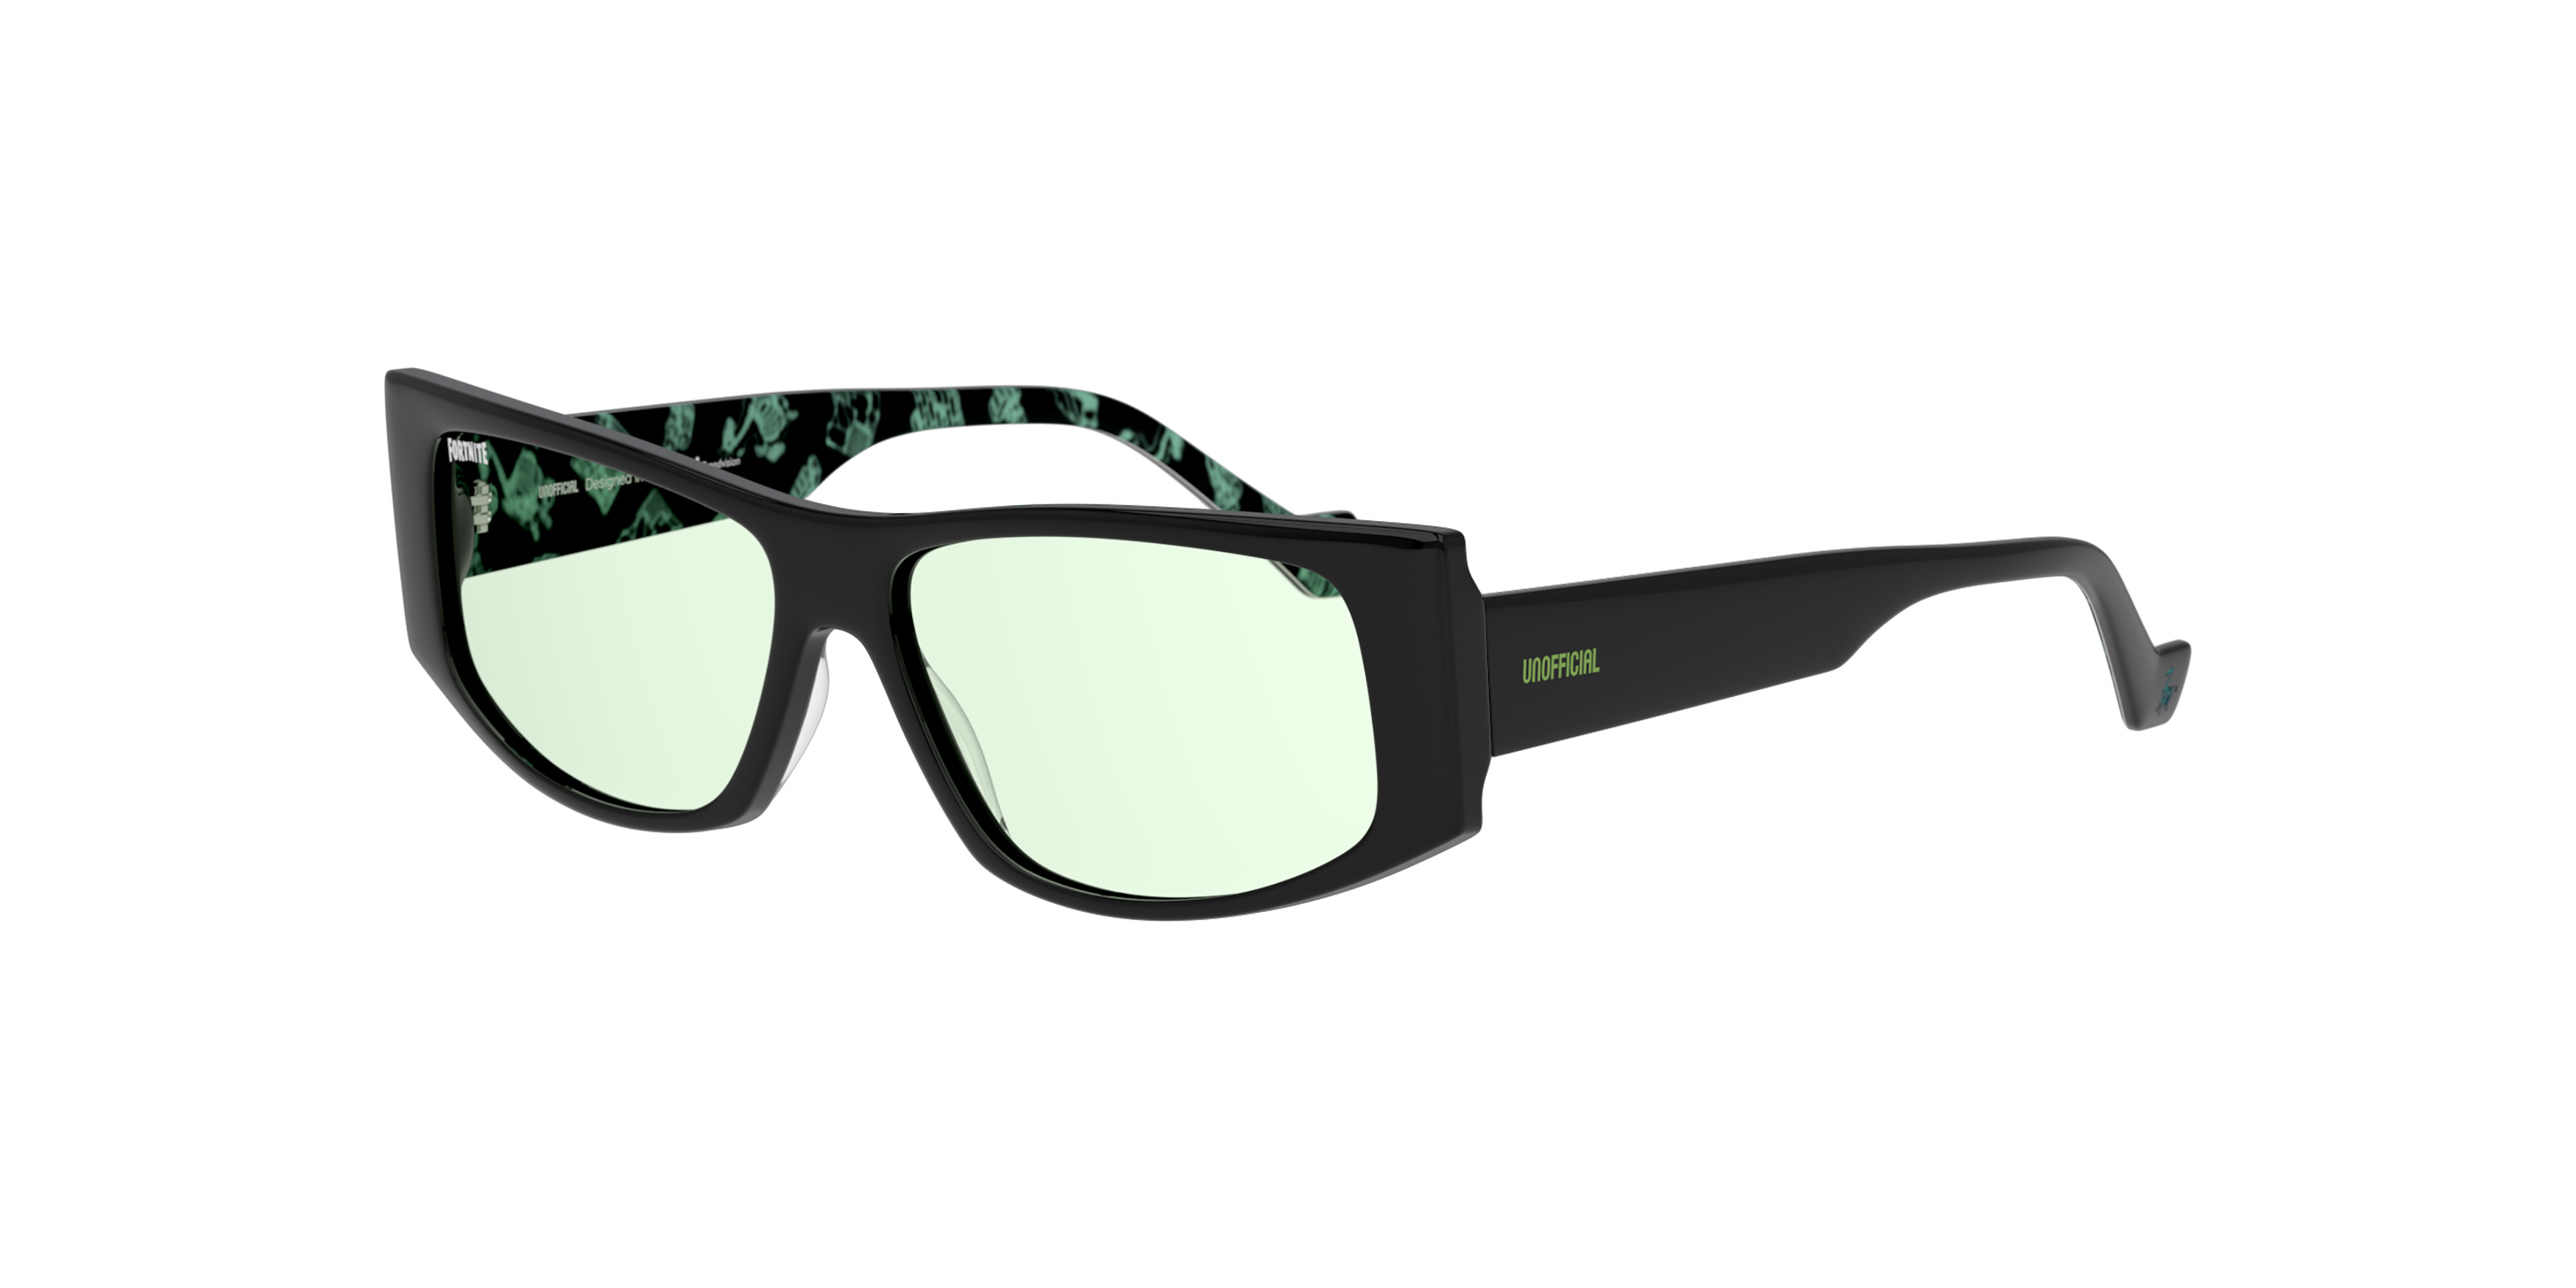 Angle_Left01 Fortnite with Unofficial UNSU0145 Sunglasses Green / Black